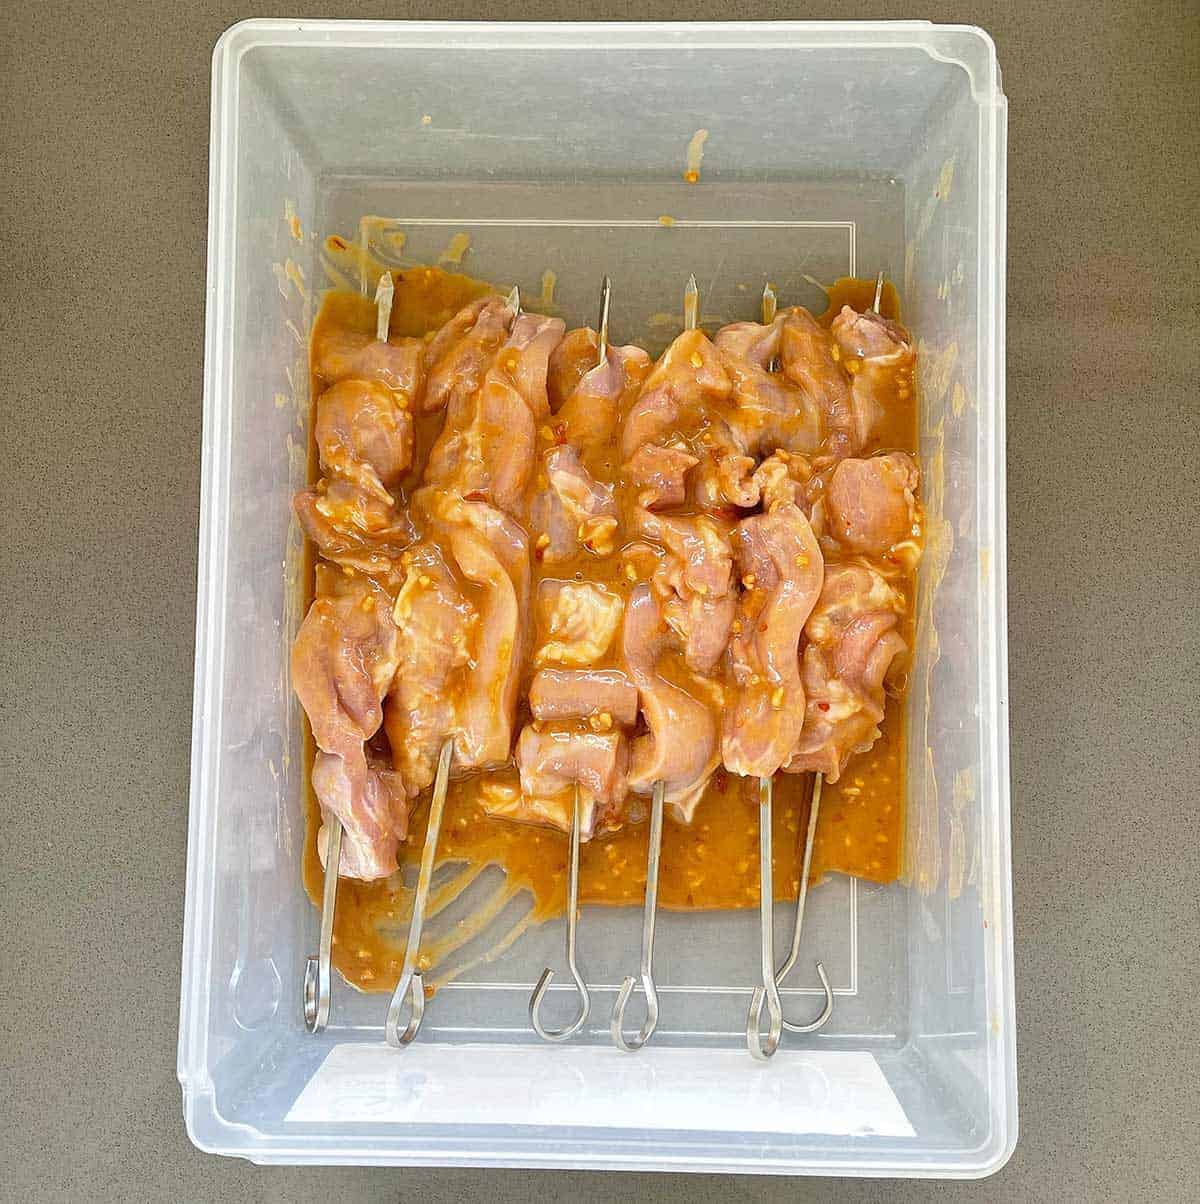 Chicken skewers and a satay marinade in a plastic container.